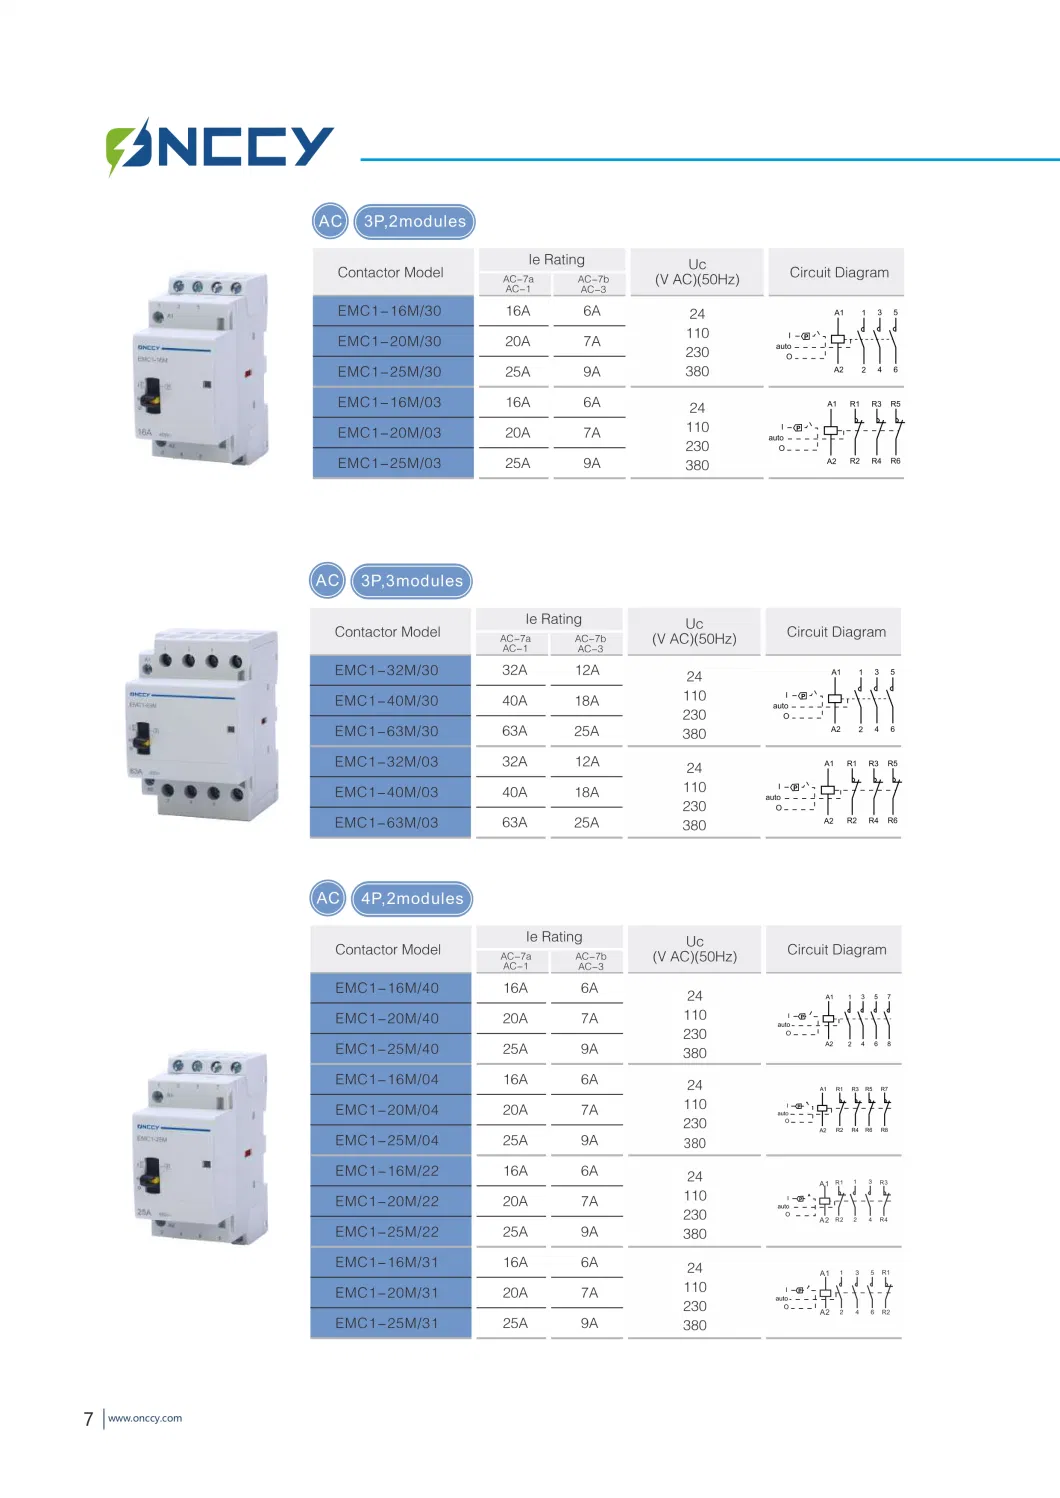 16A-125A AC Modular Contactor for Lighting Systems, Heat Pumps, Air-Conditioning or Ventilation Systems.